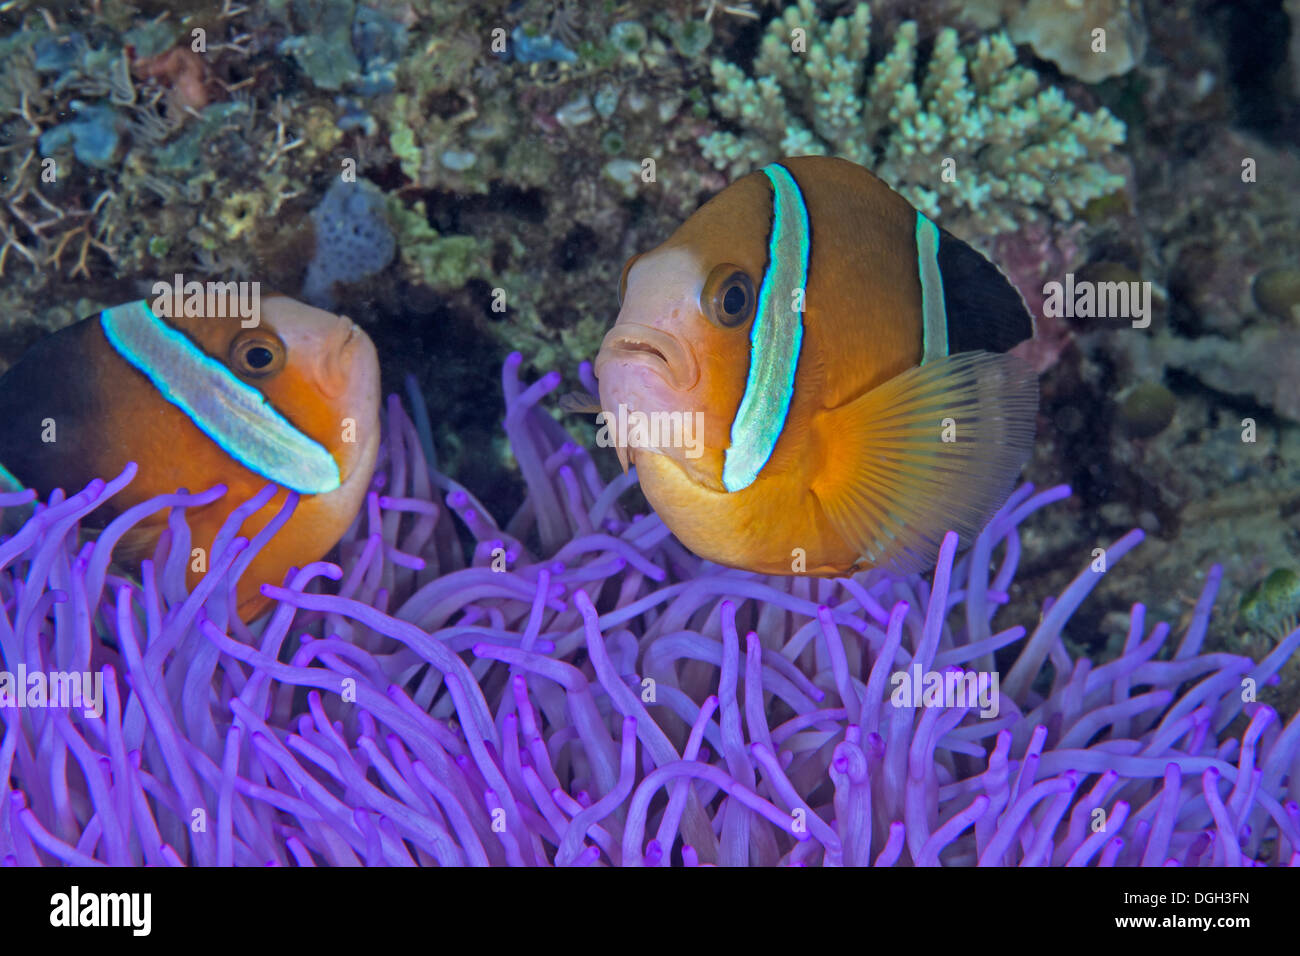 Two-banded clownfish (Amphiprion bicinctus) on fluorescent anemone. Stock Photo